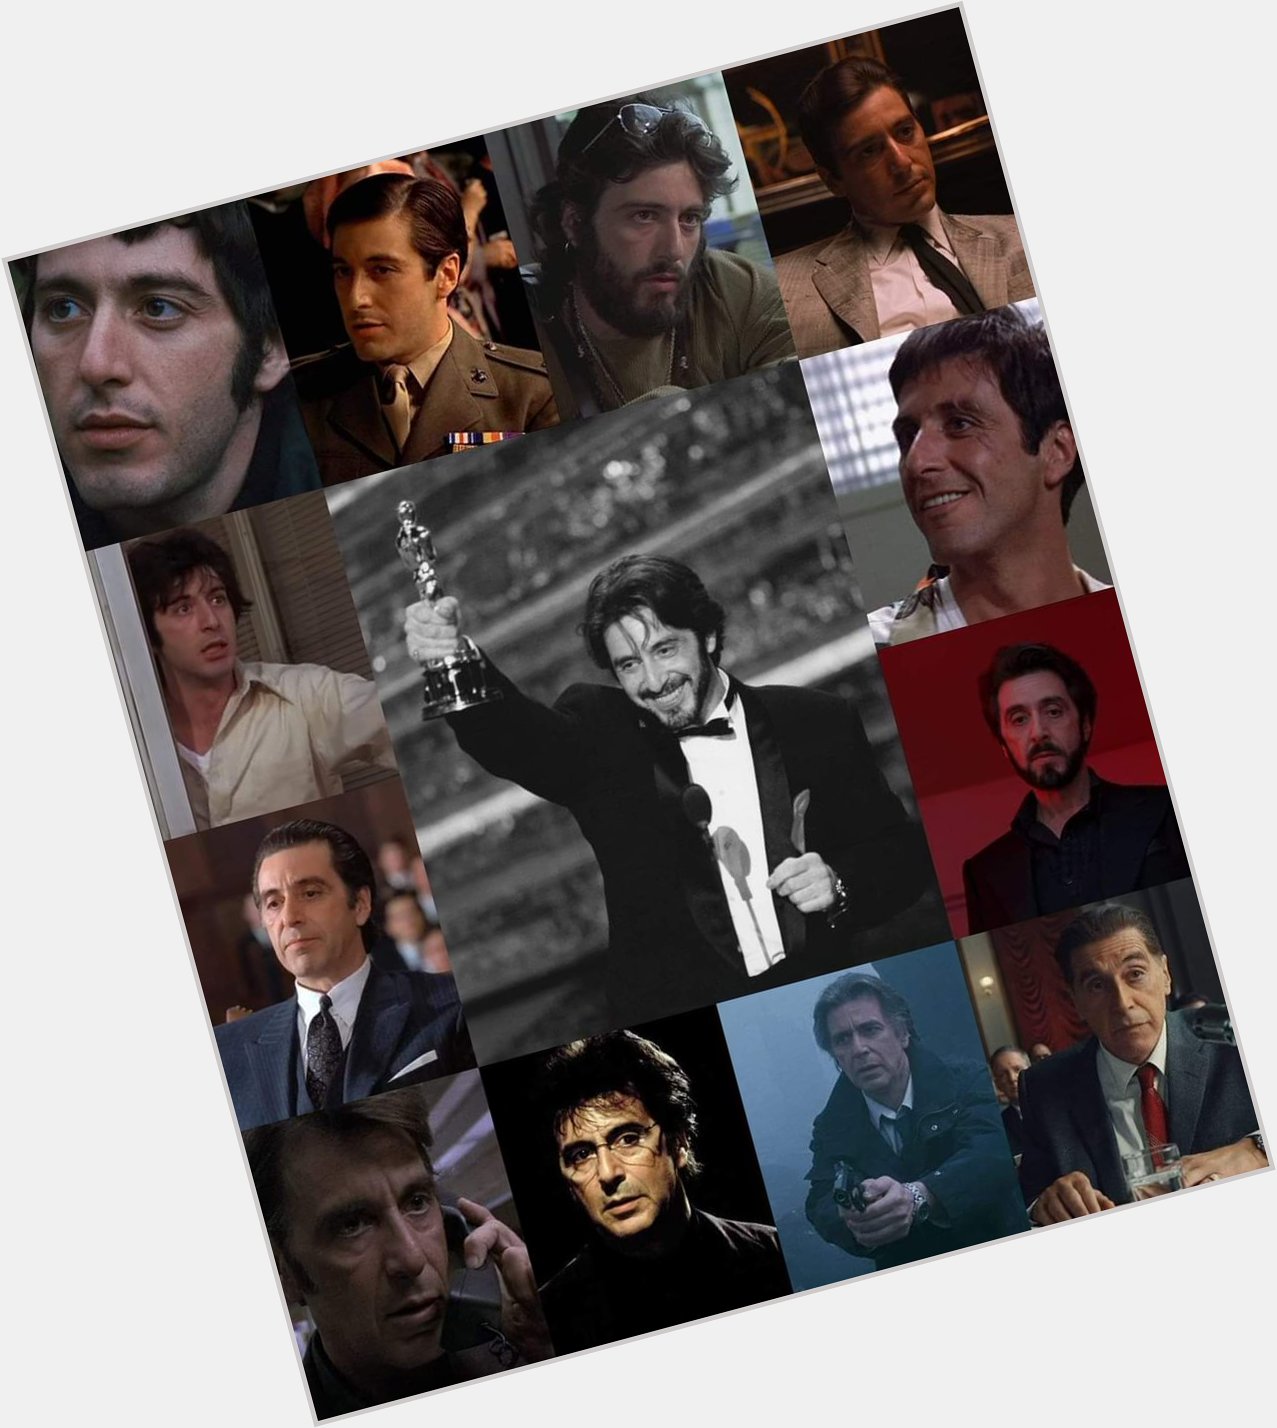 Happy 81st birthday to one of the greatest actors of all time who made us enjoy the cinema. Mr. Al Pacino 